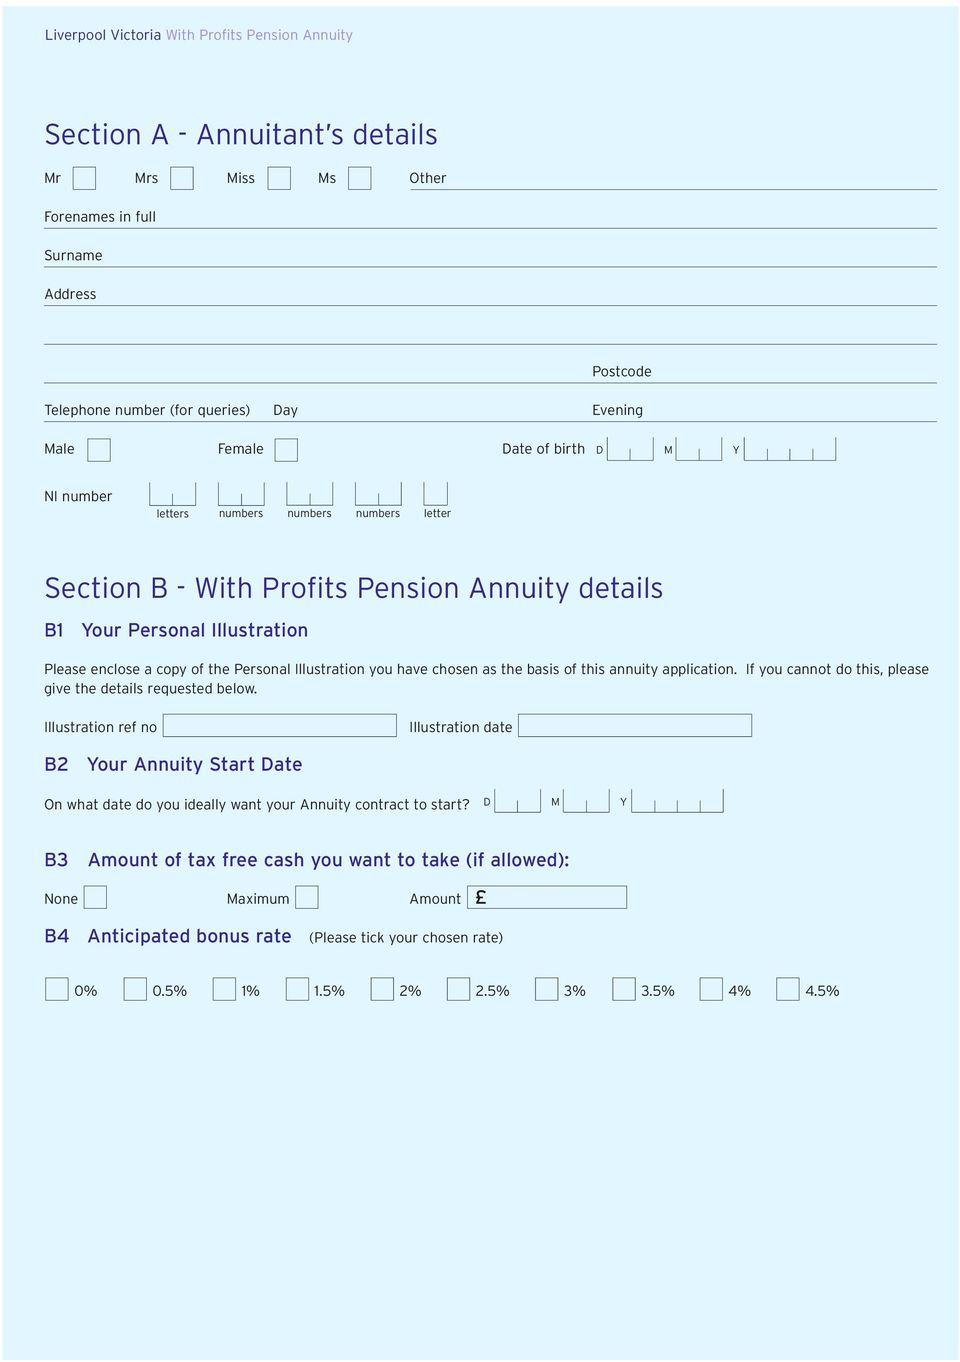 annuity application. If you cannot do this, please give the details requested below.